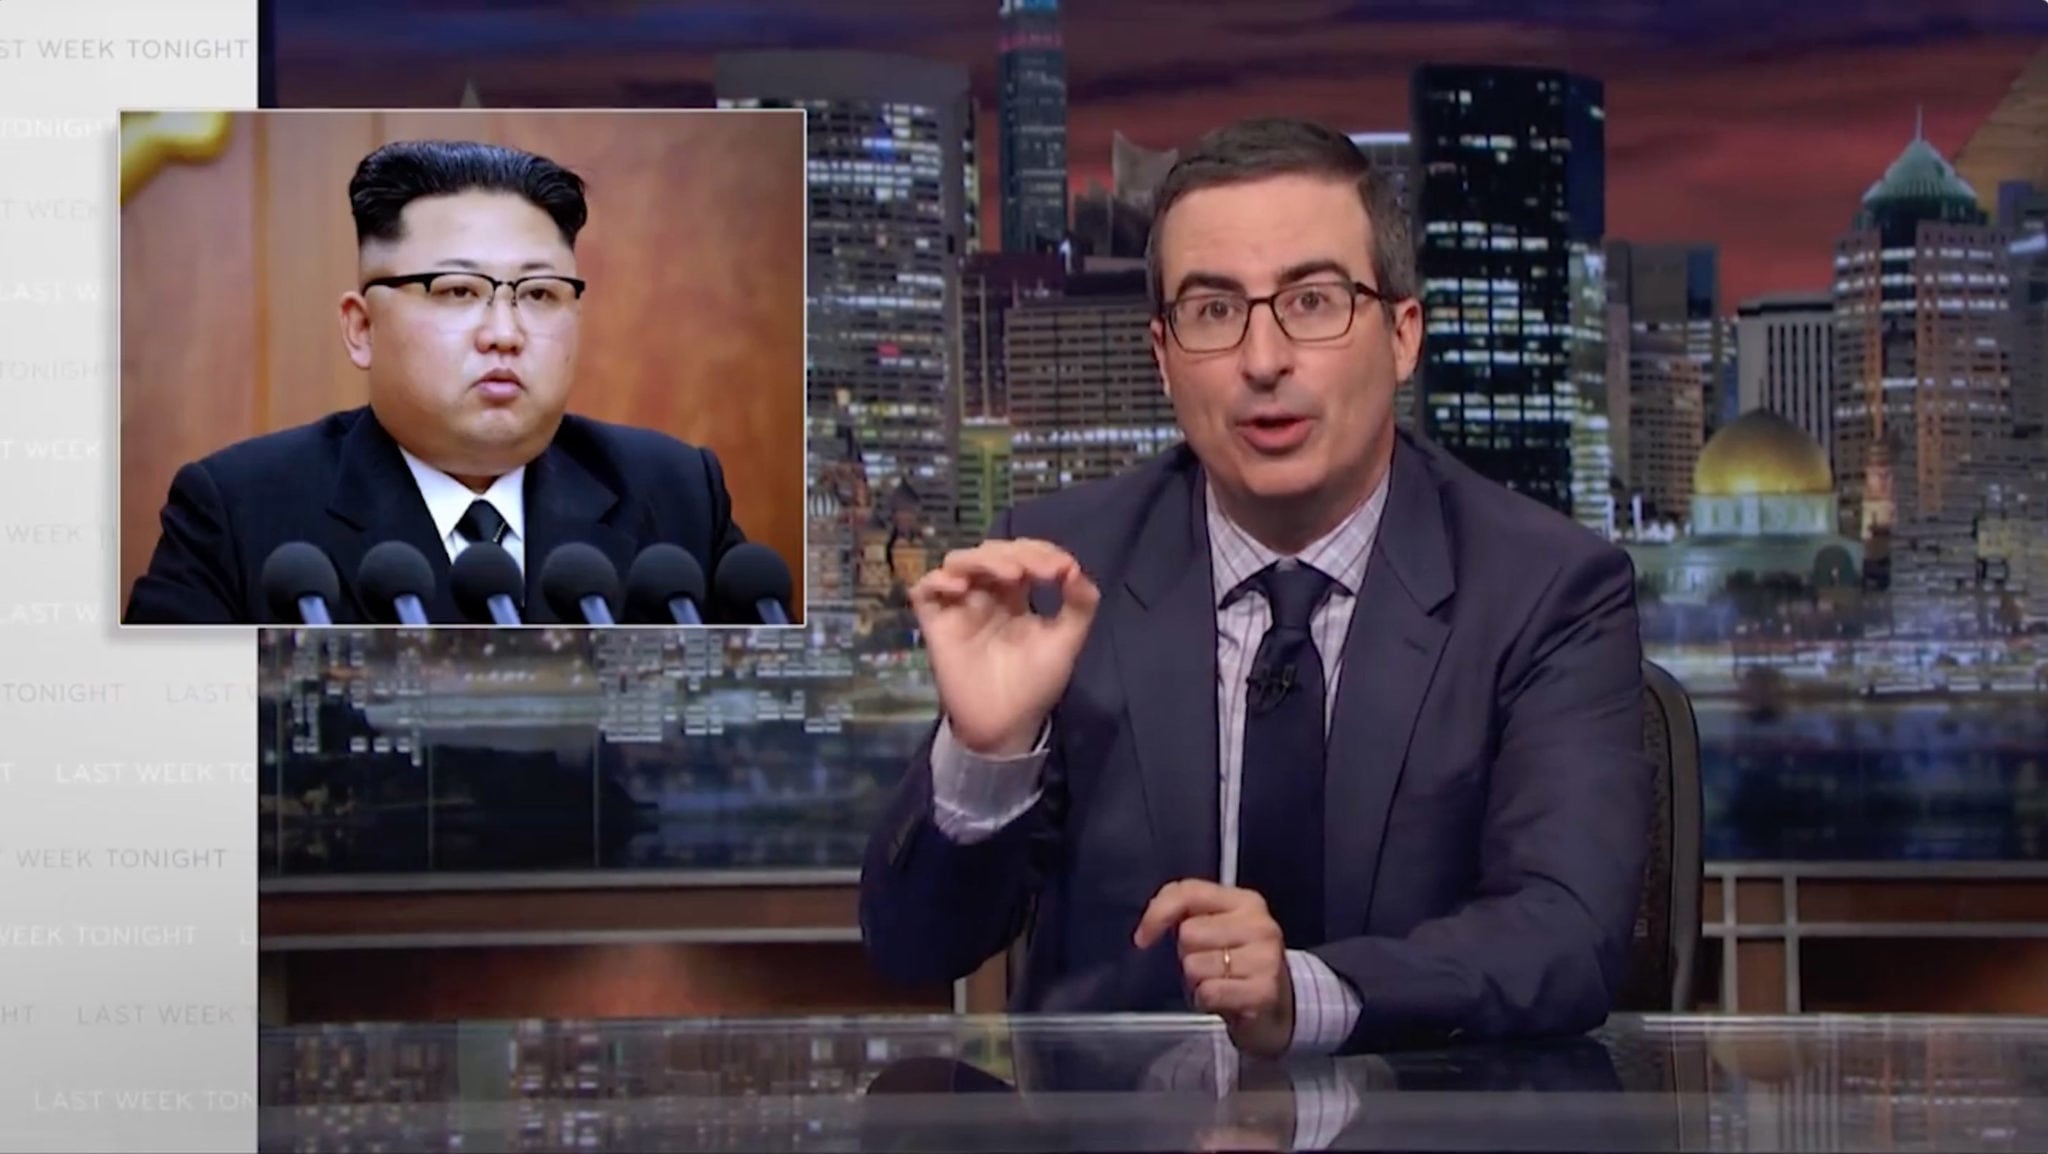 Flash Drives for Freedom featured on Jon Oliver’s Last Week Tonight